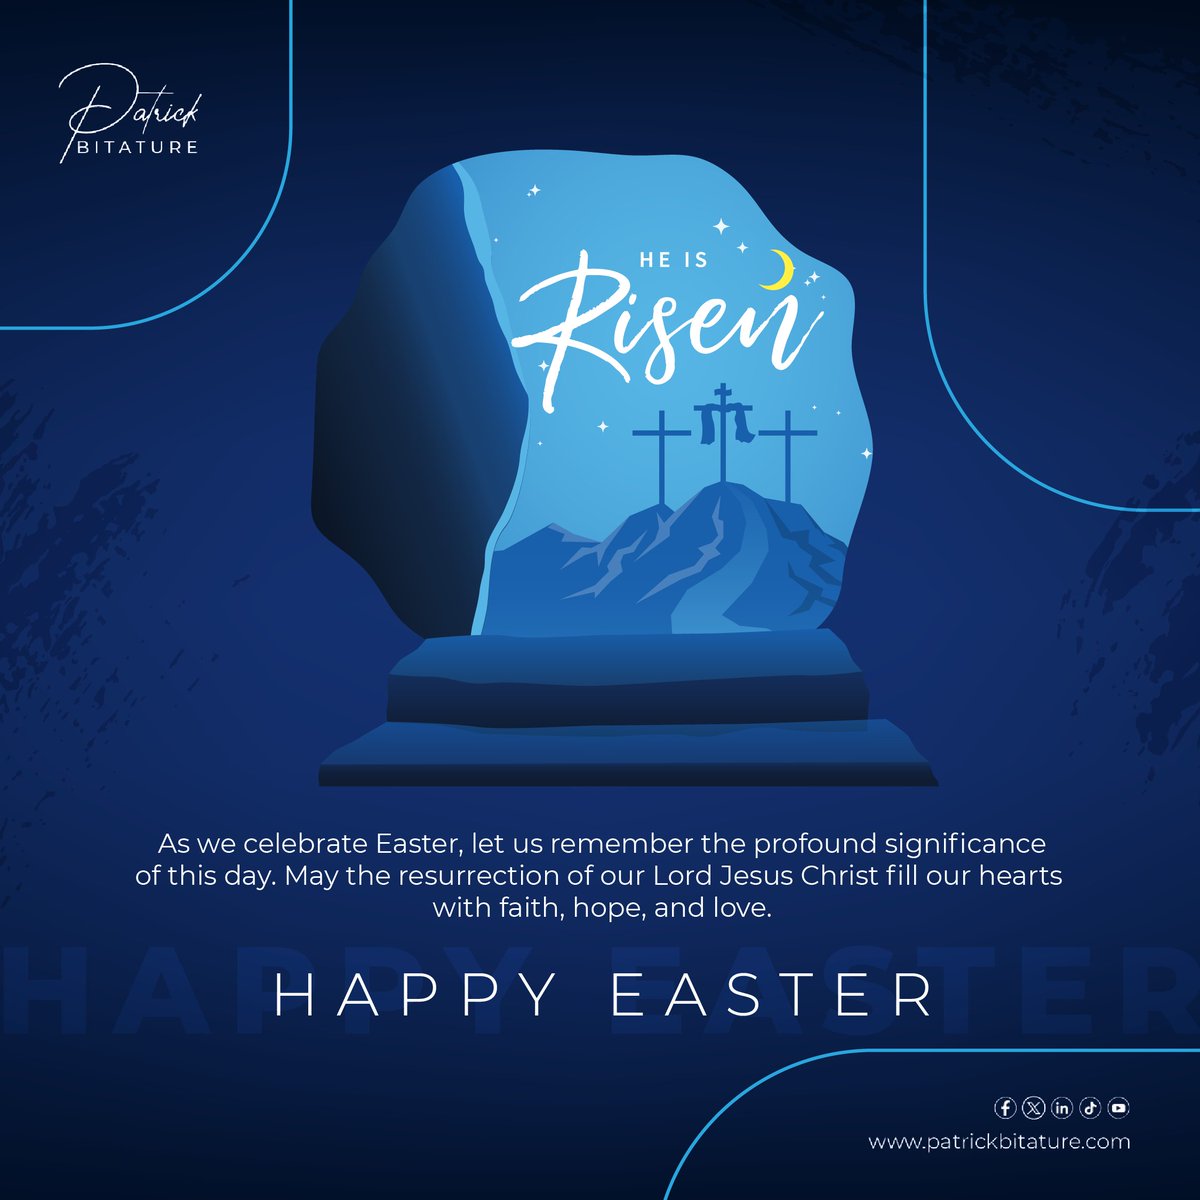 Wishing you a day full of peace, joy, love and a renewed hope that what was dead can be raised to life again. Happy Easter!